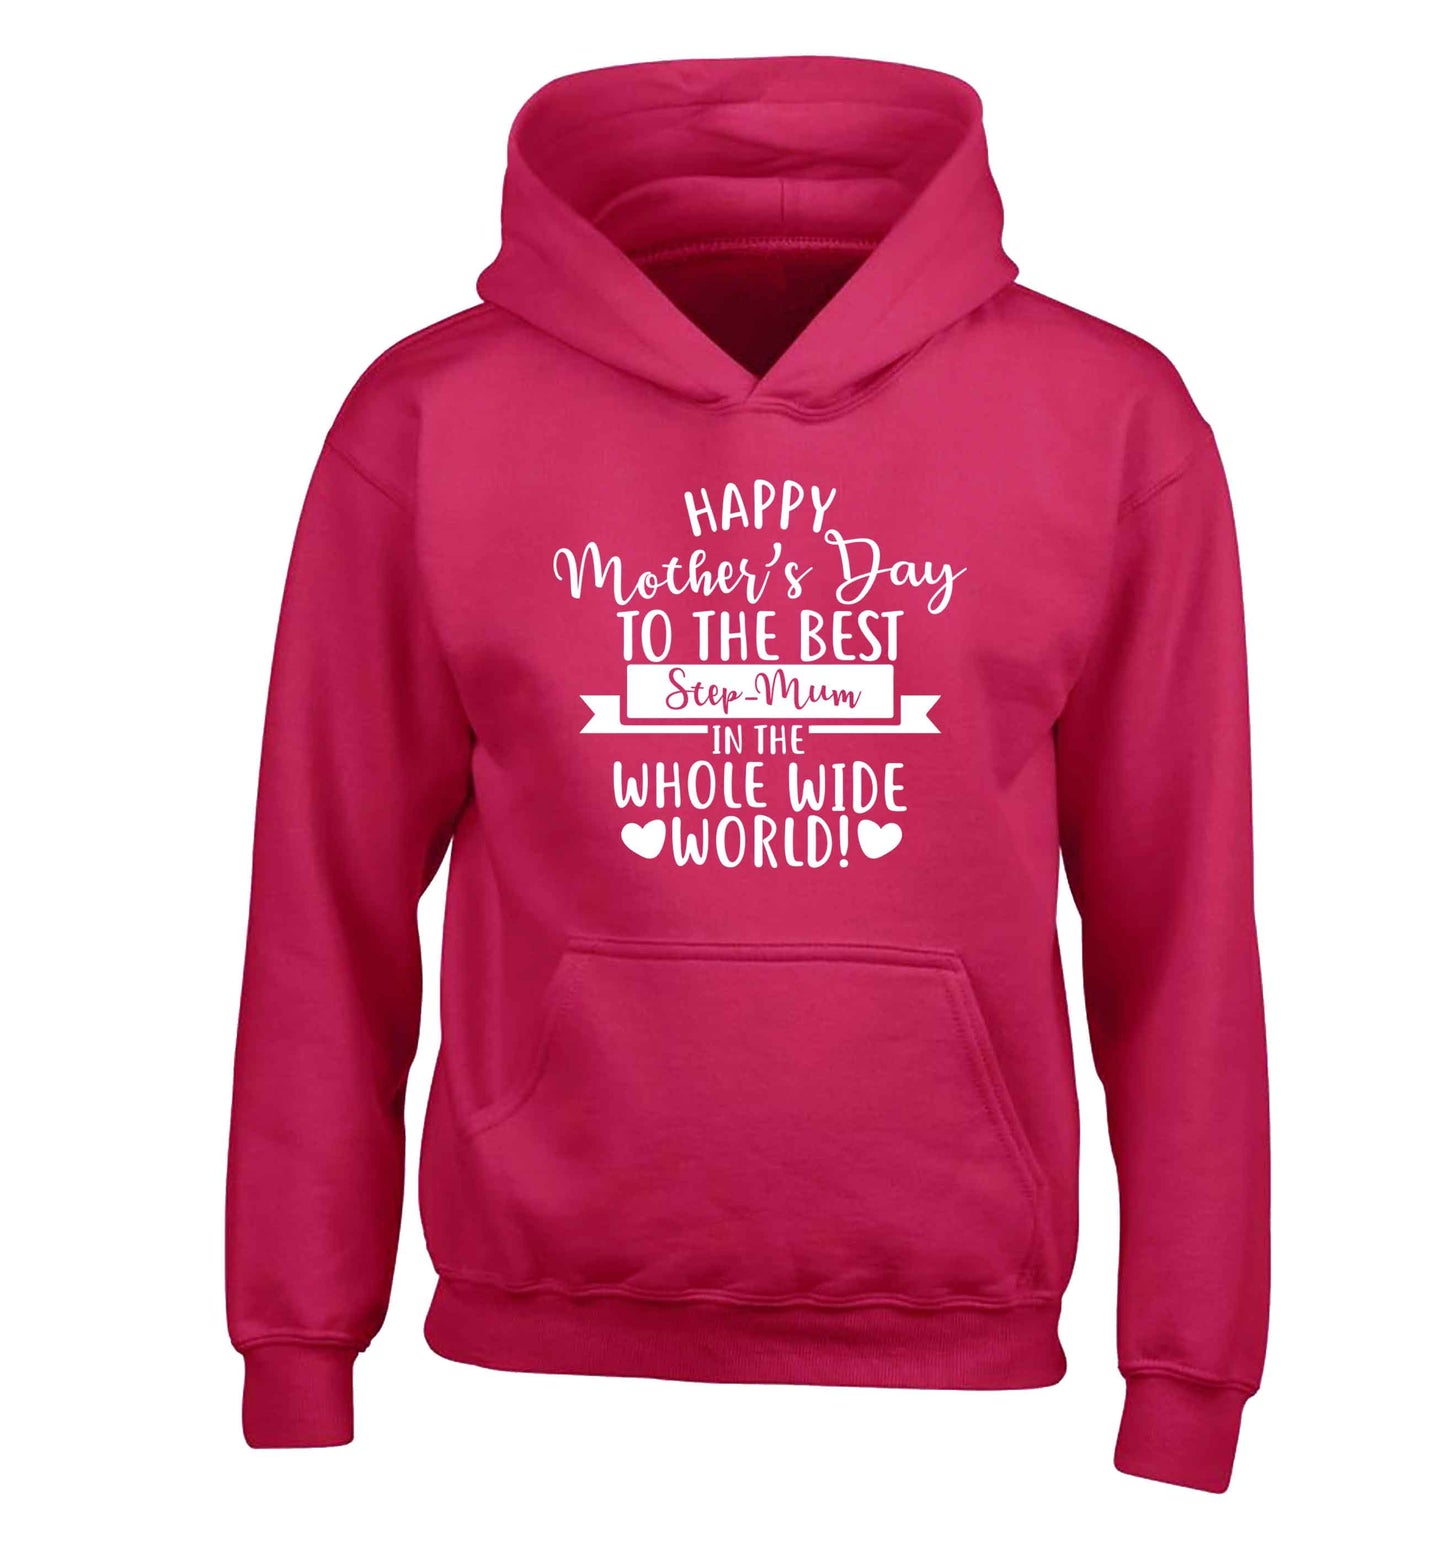 Happy mother's day to the best step-mum in the world children's pink hoodie 12-13 Years